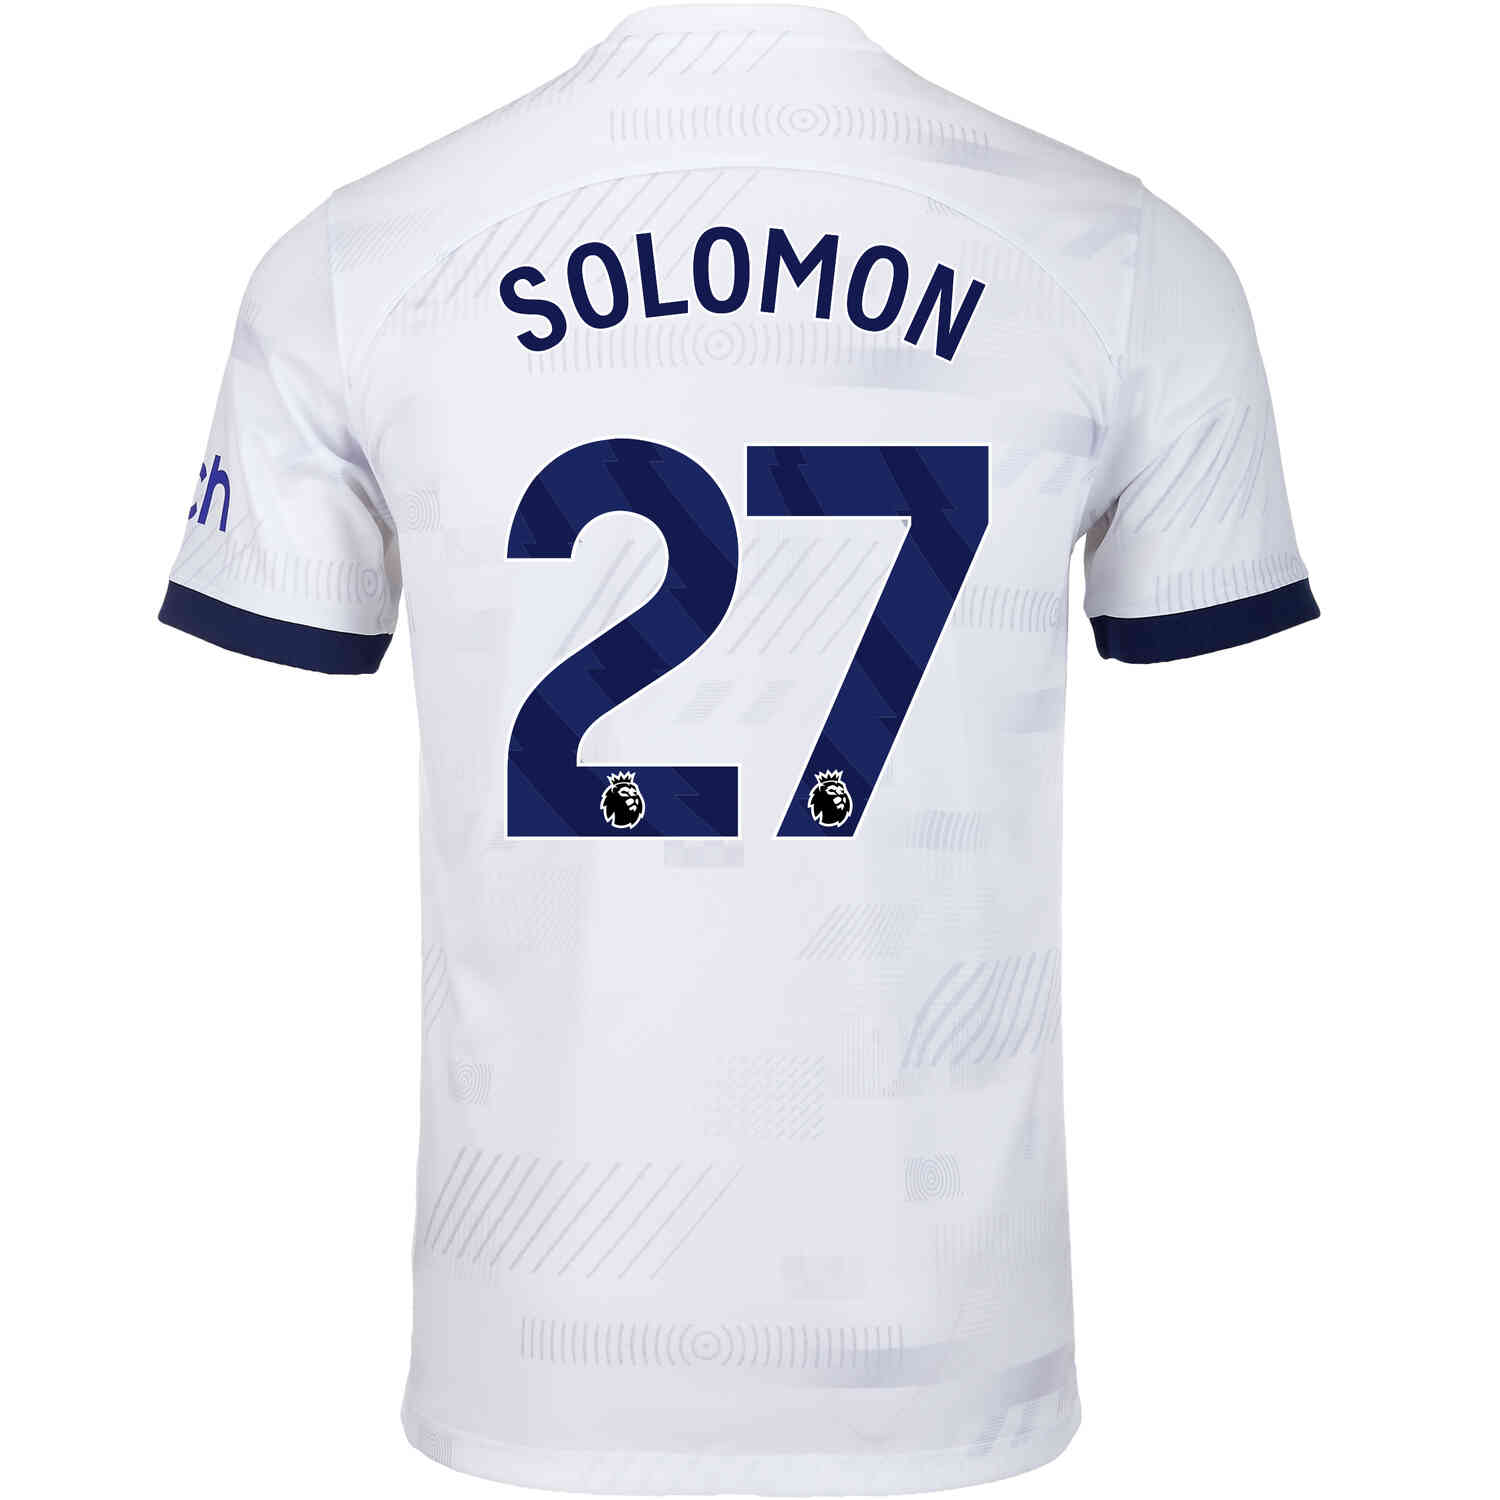 New 2023-24 Tottenham home kits released, available now